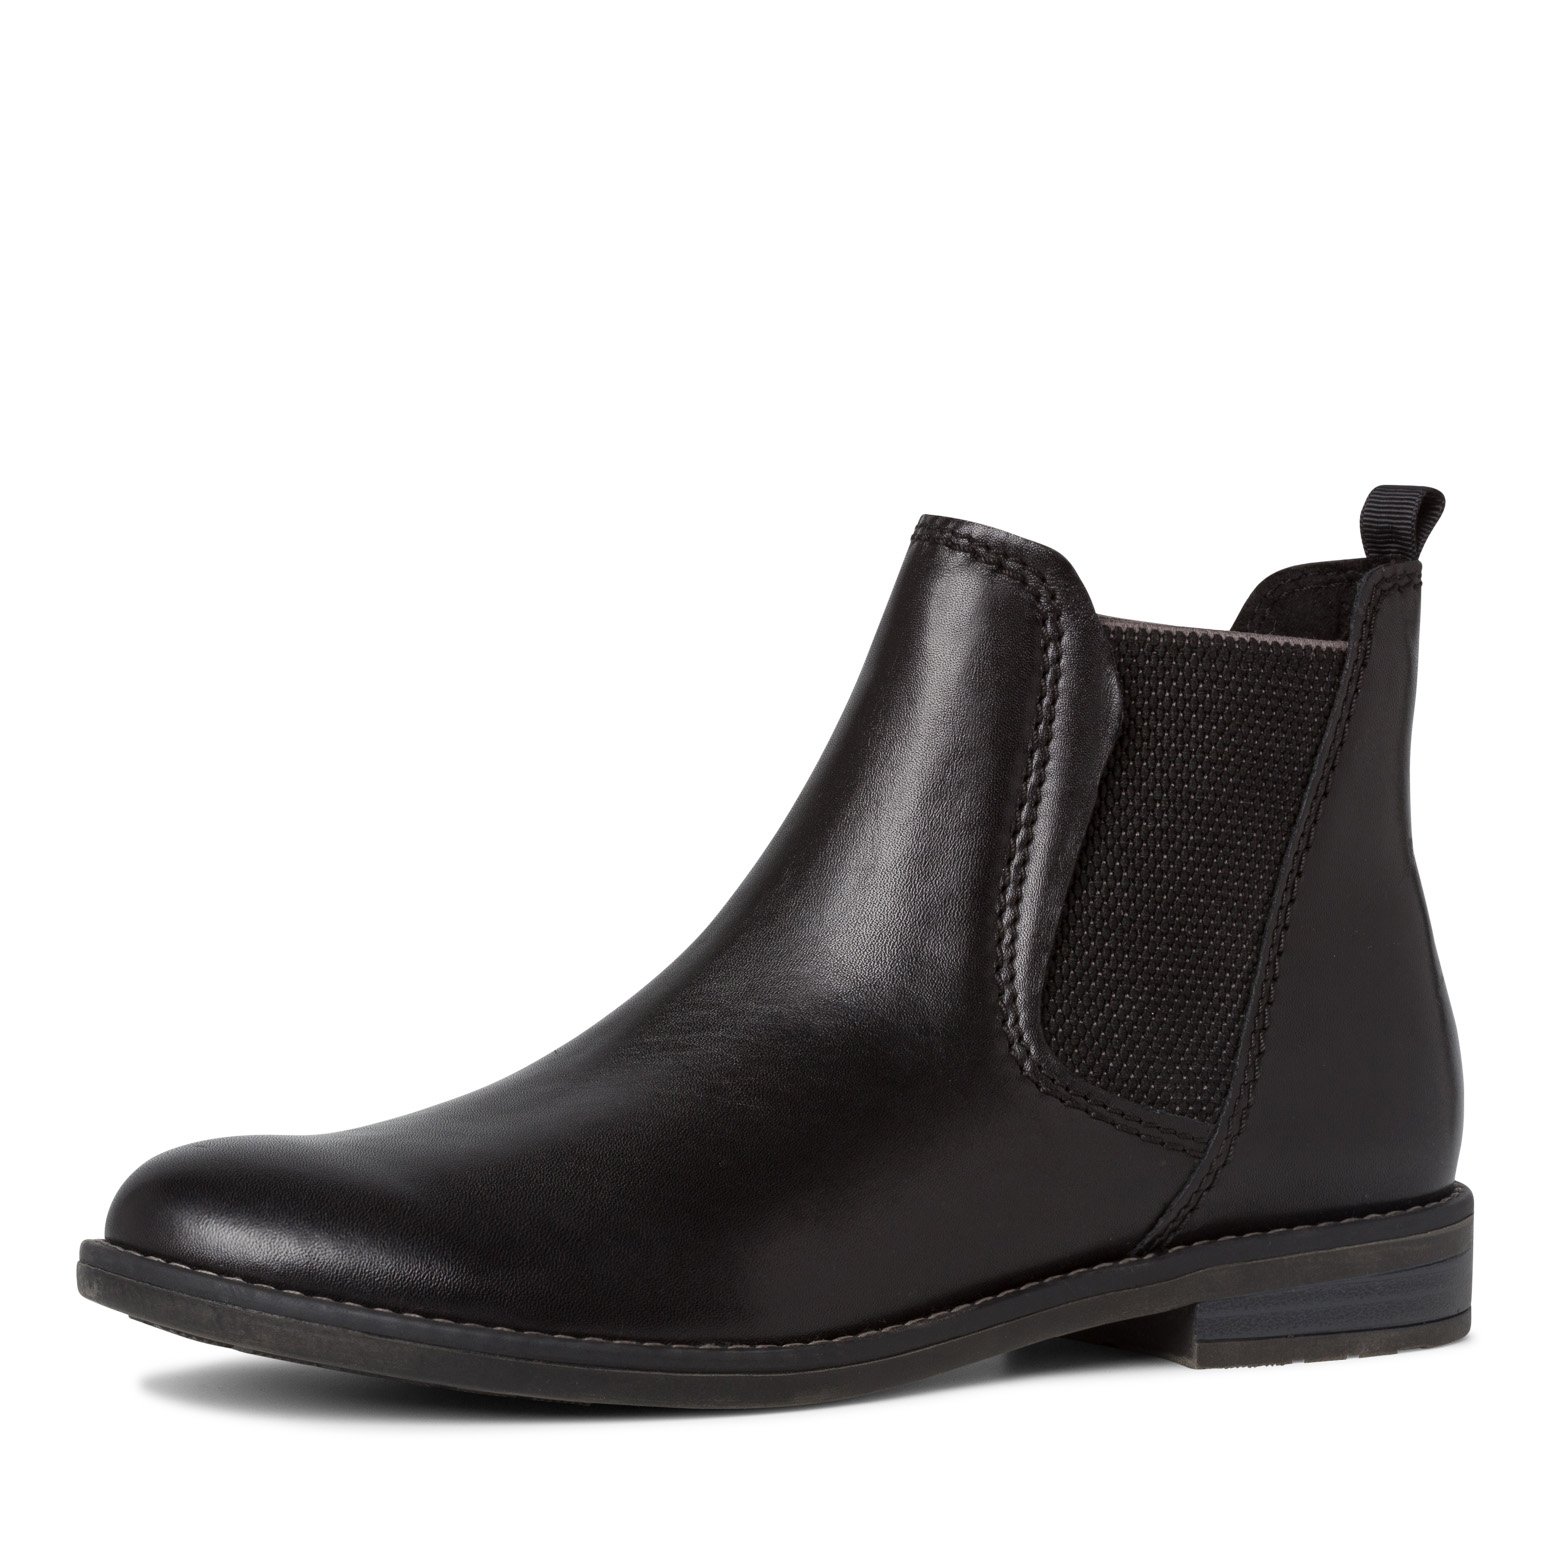 Leather Chelsea boot 2-2-25366-35: Buy Chelsea boots from Marco Tozzi ...